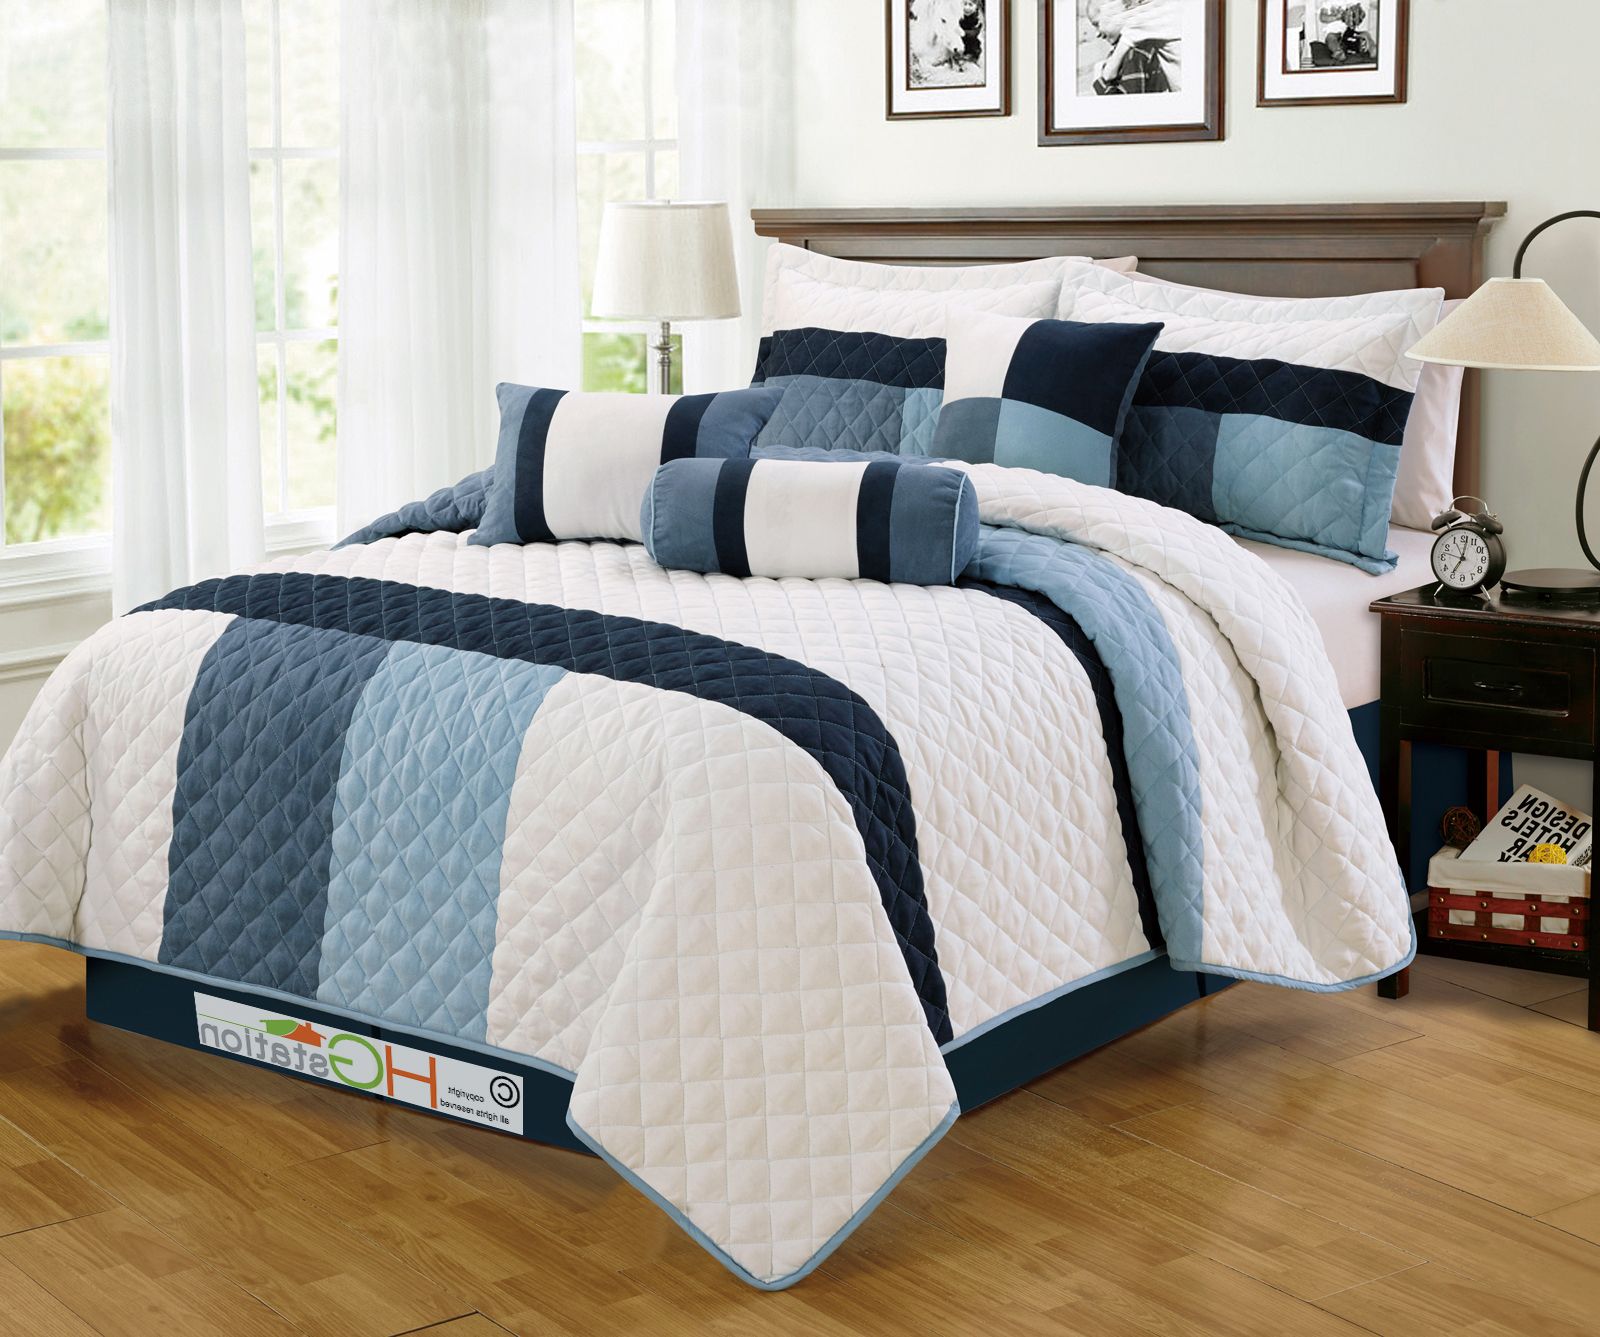 Most Recently Released 7 Pc Soft Faux Suede Sleek Quilted Striped Patchwork Comforter Set Navy Inside Navy Blue And White Striped Ottomans (View 3 of 10)